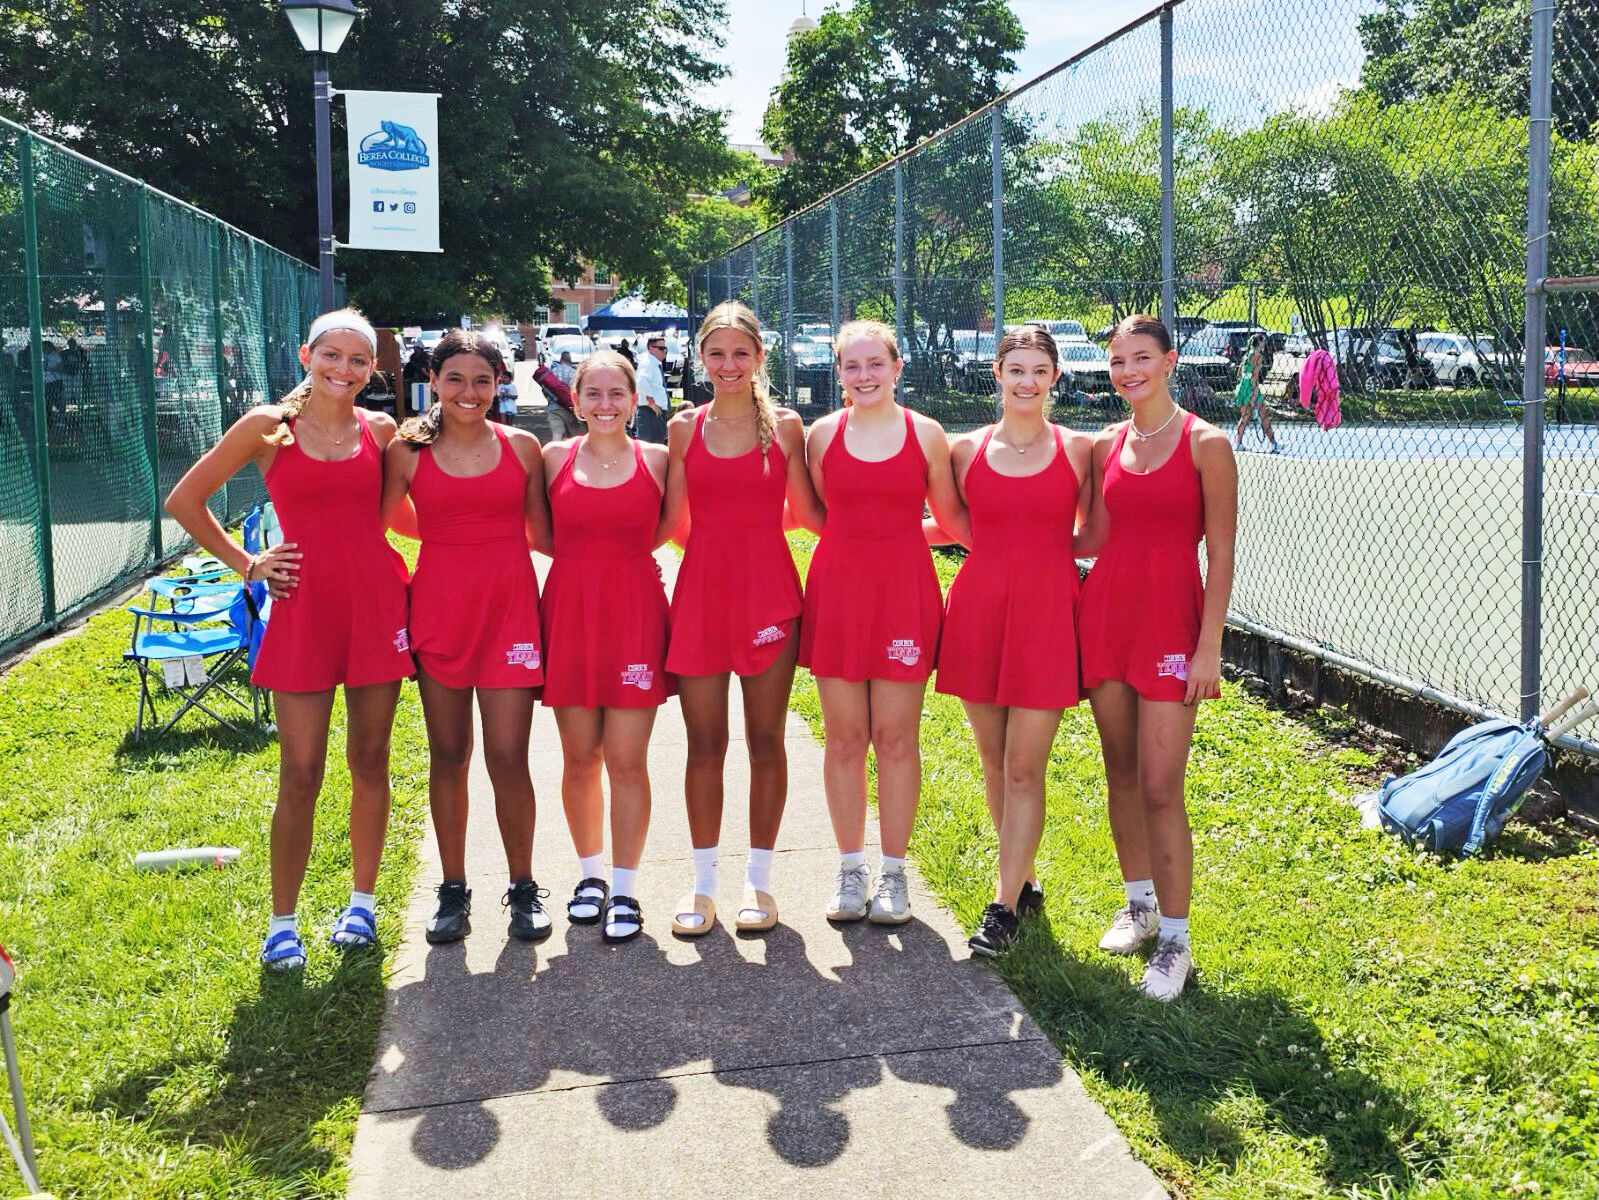 Lady Redhounds advance in KHSAA Girls State Team Tennis Tournament with two wins